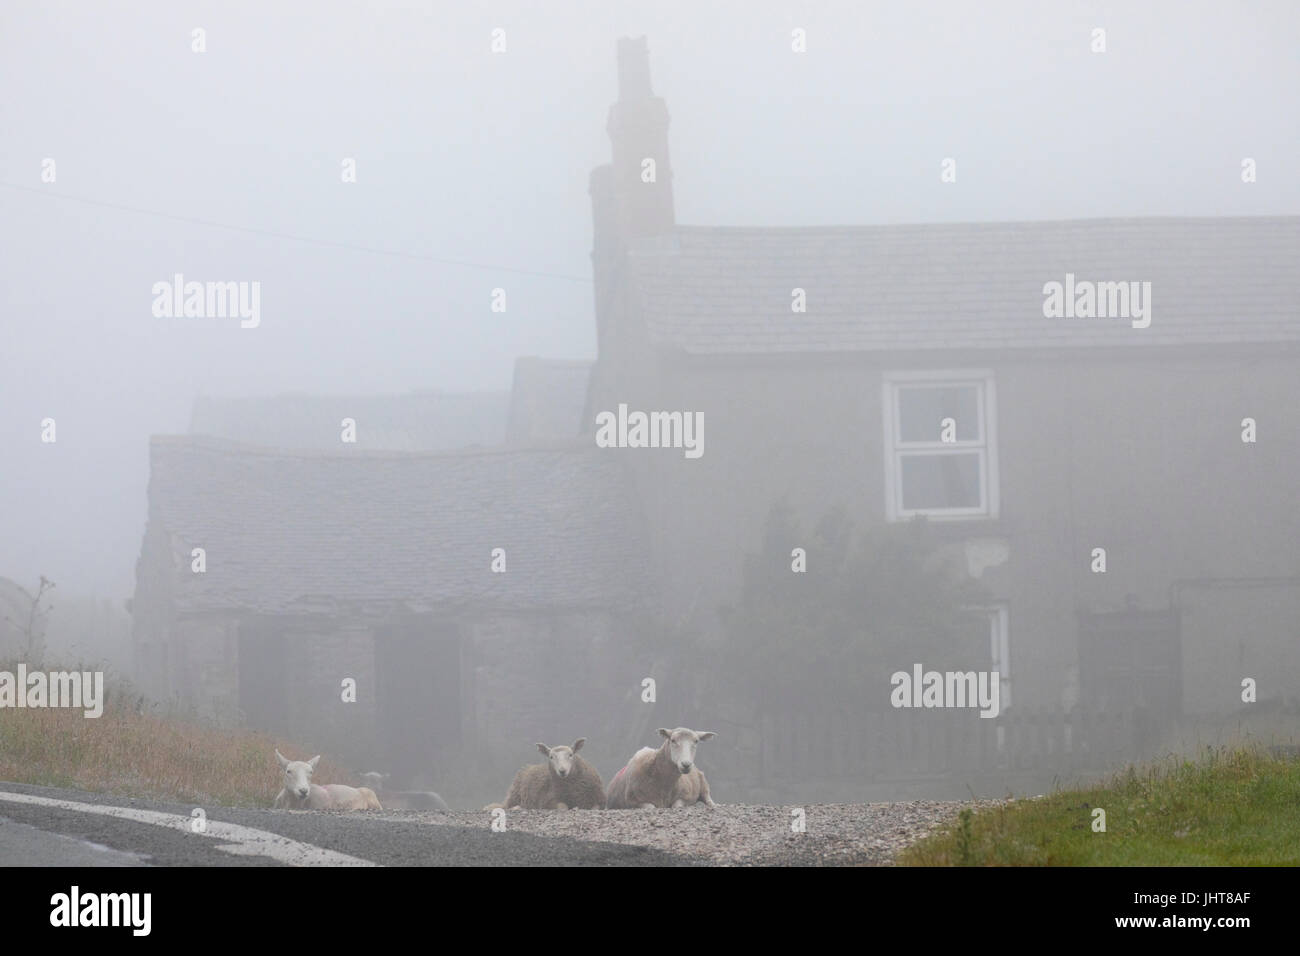 Sheep lay down on road in the mist and fog in front of their farmers house on Halkyn Mountain, North Wales, UK Stock Photo